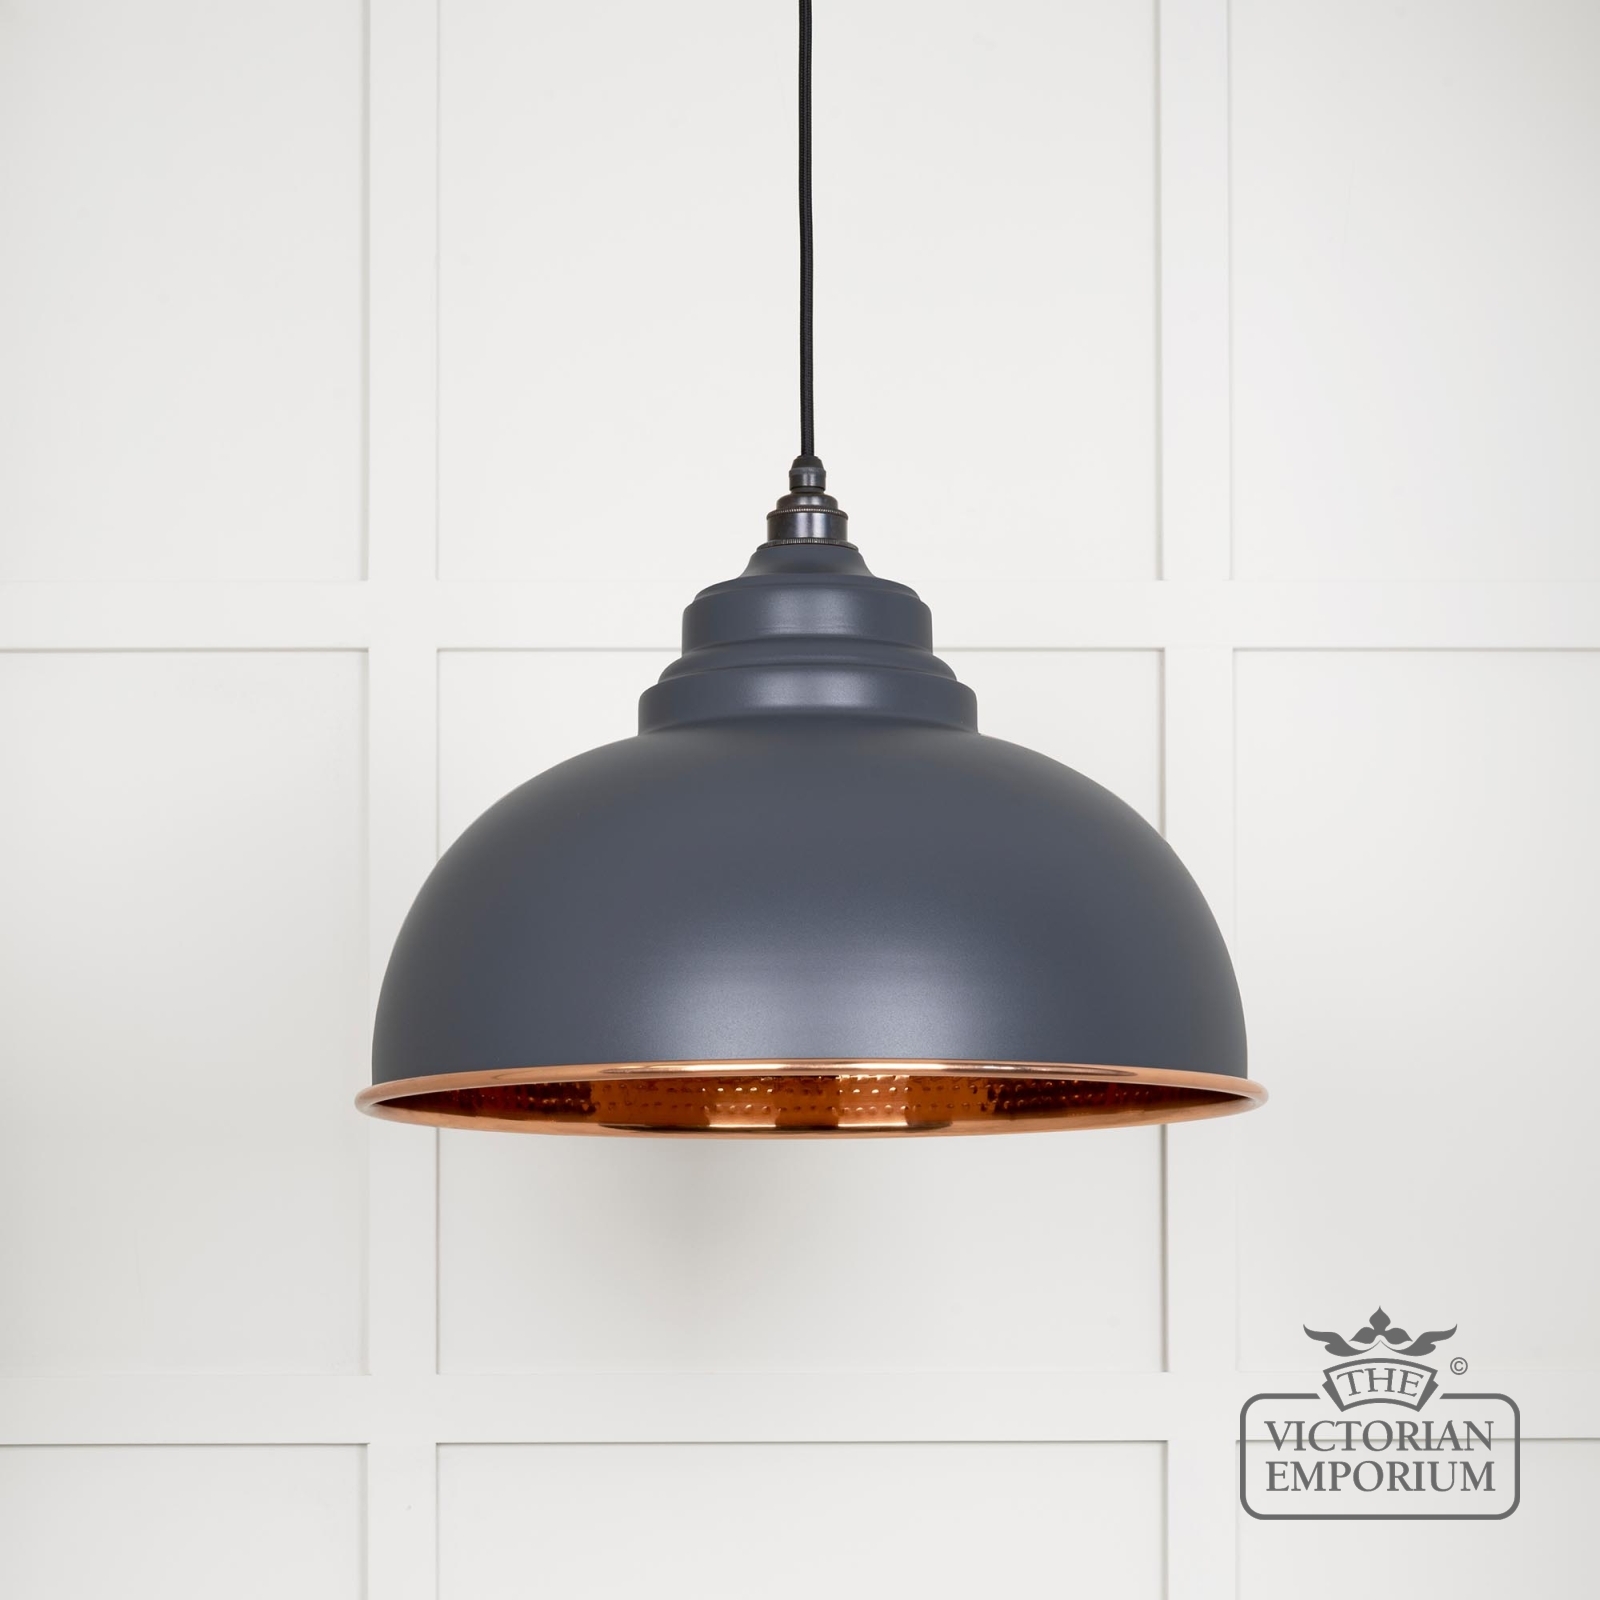 Harlow pendant light in hammered copper with Slate exterior